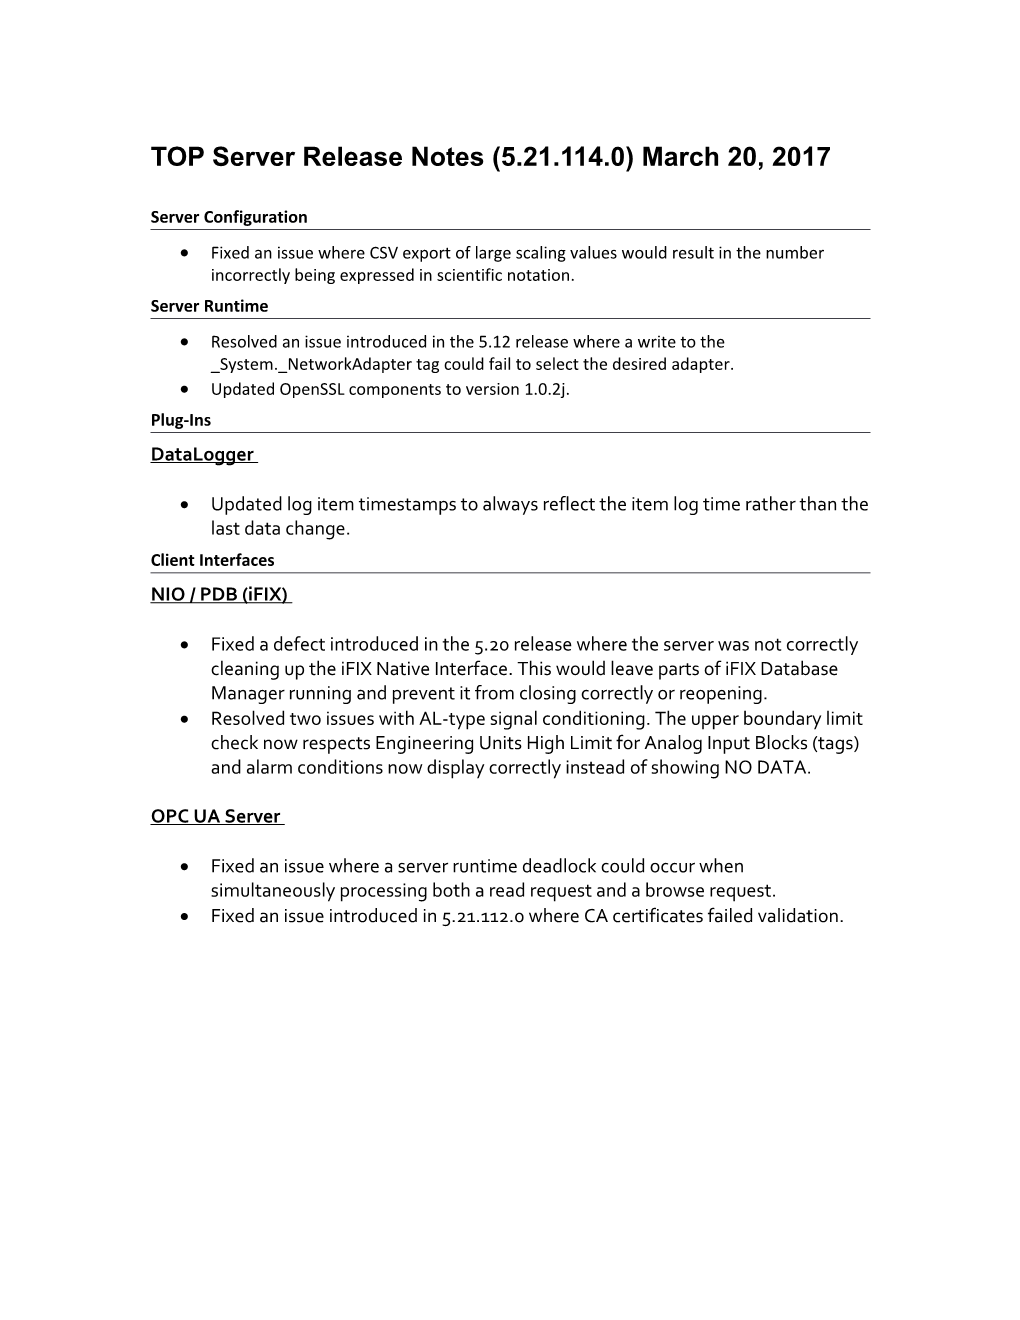 TOP Server Release Notes (5.21.114.0) March20, 2017